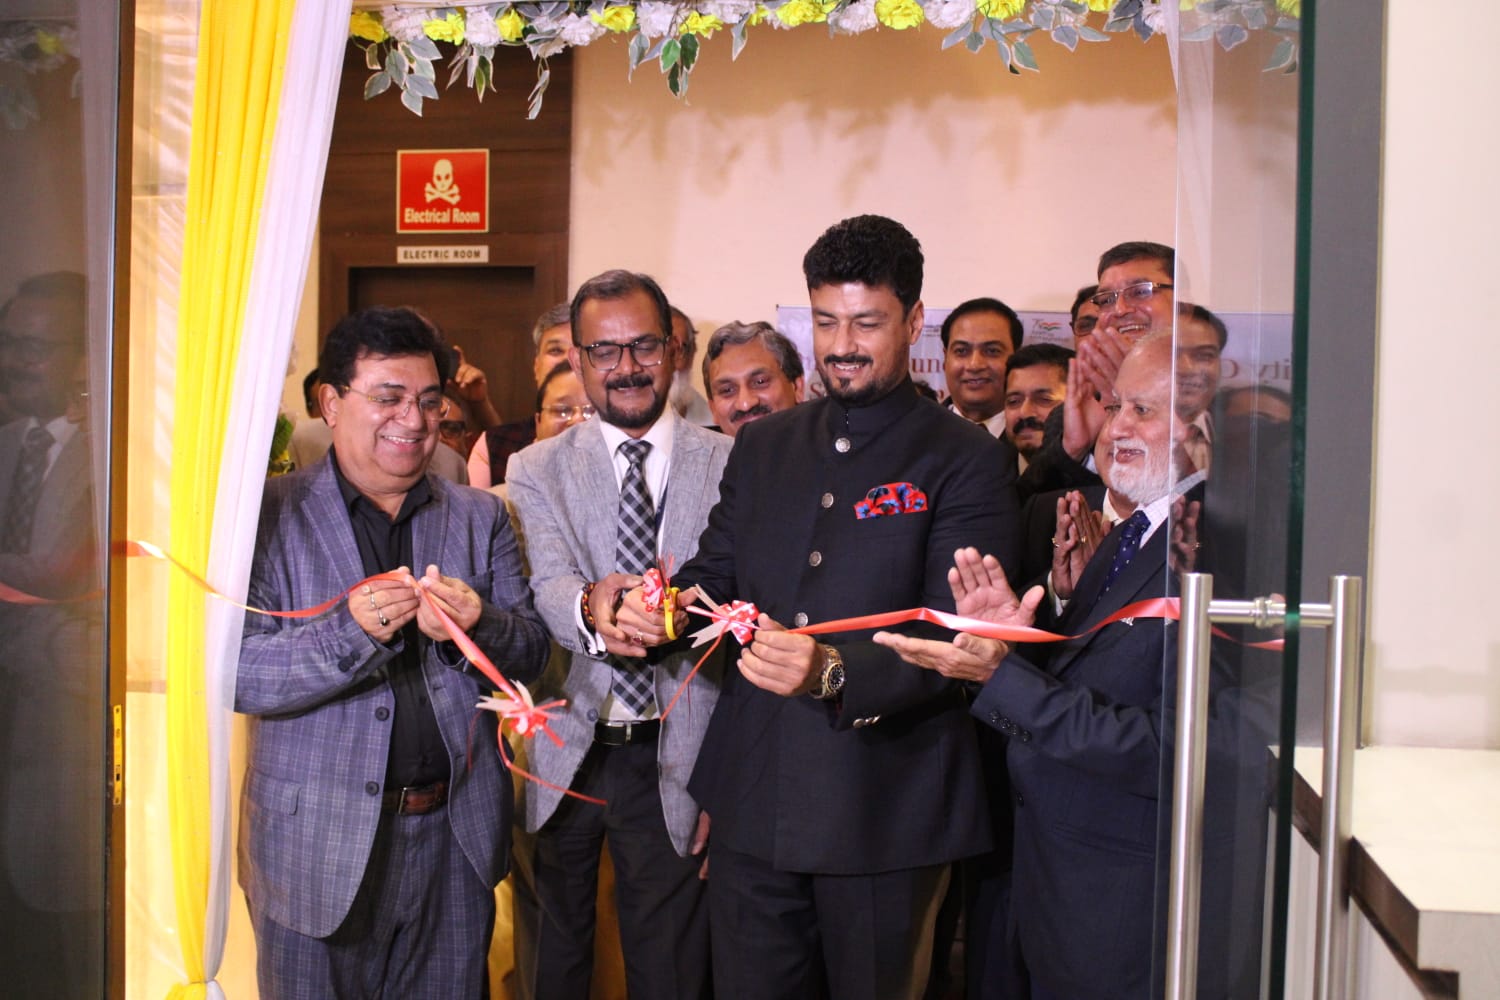 Quality Council of India (QCI) Expands its Footprint to the East with the Inauguration of Kolkata Office